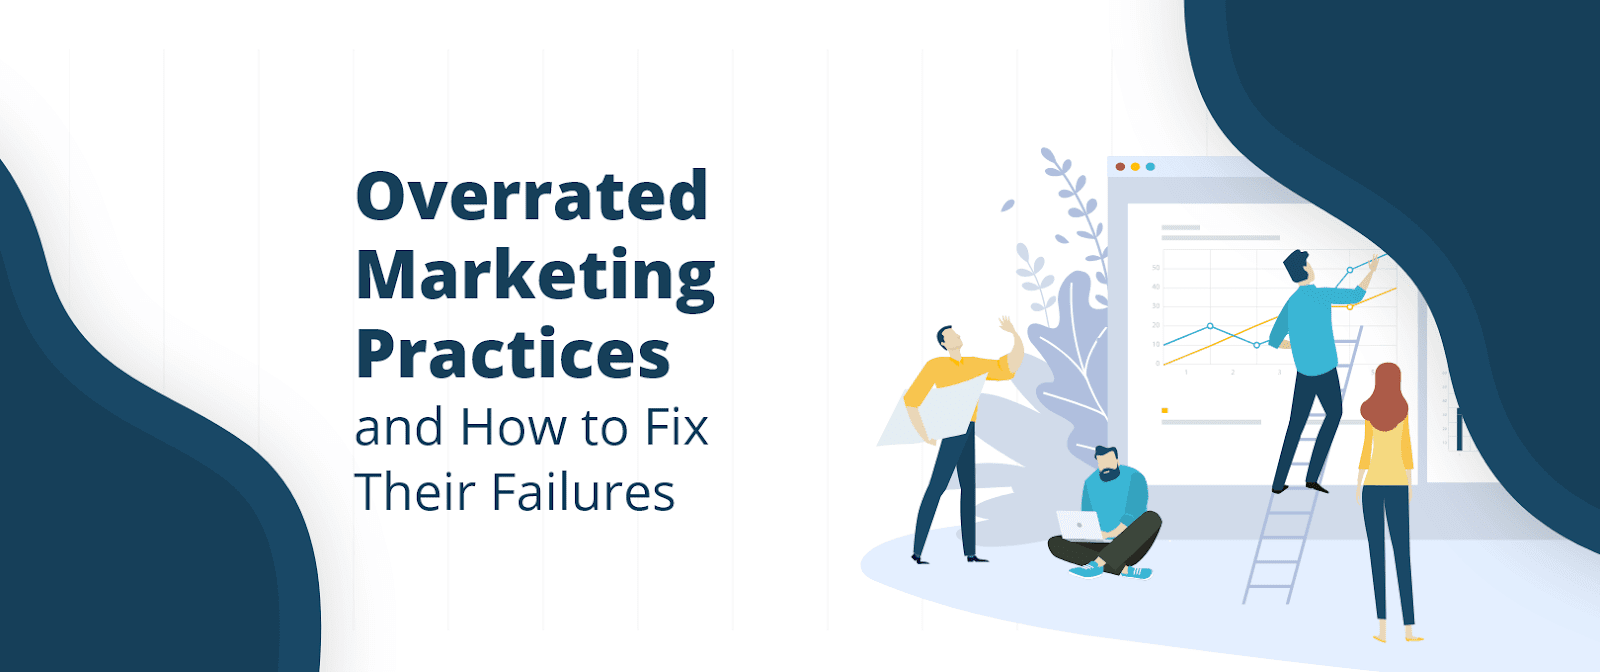 Overrated Marketing Practices and How to Fix Their Failures - DevriX